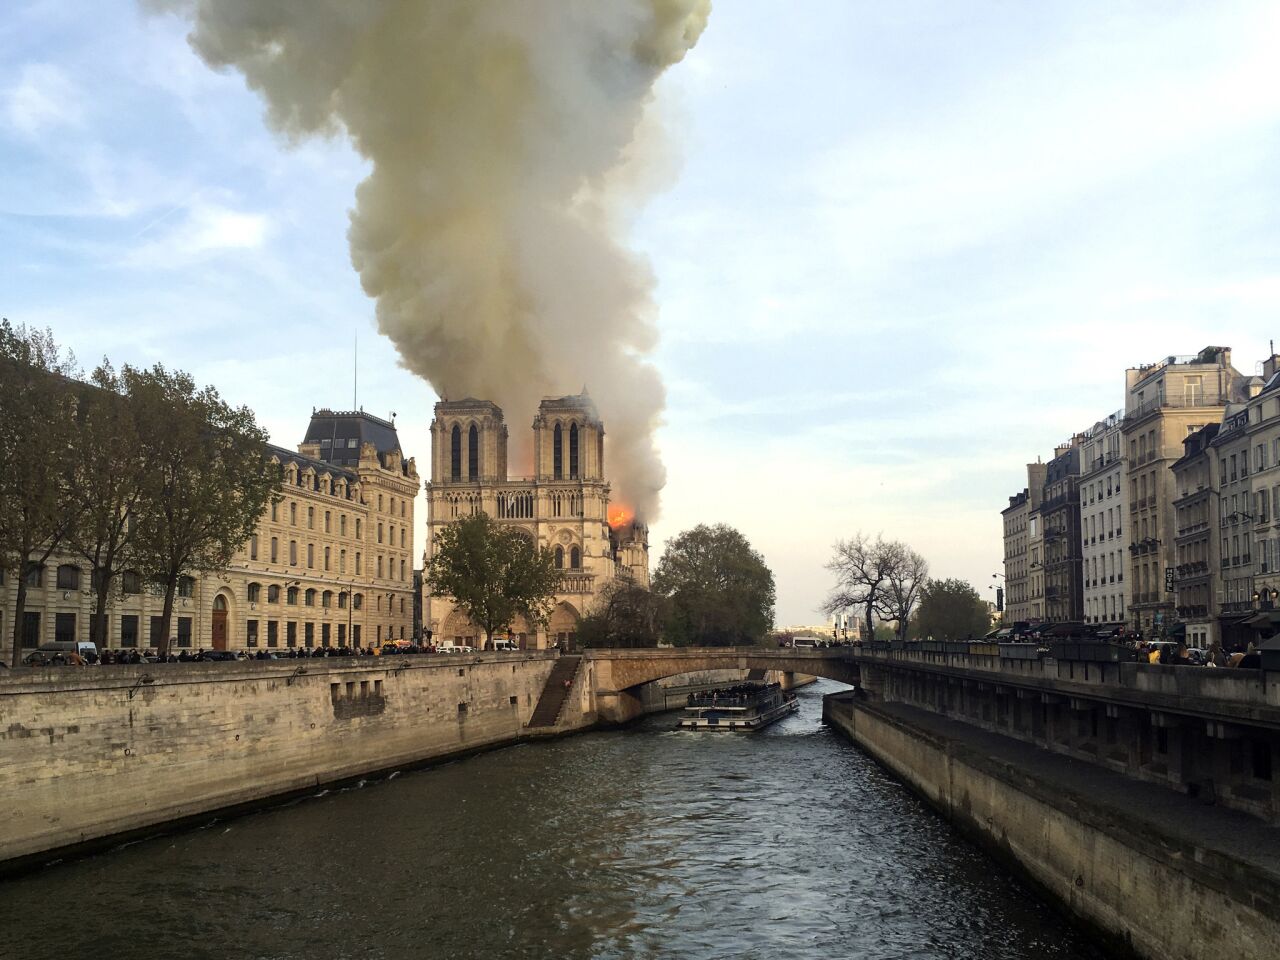 Massive plumes of smoke fill the air above Notre Dame Cathedral in Paris.